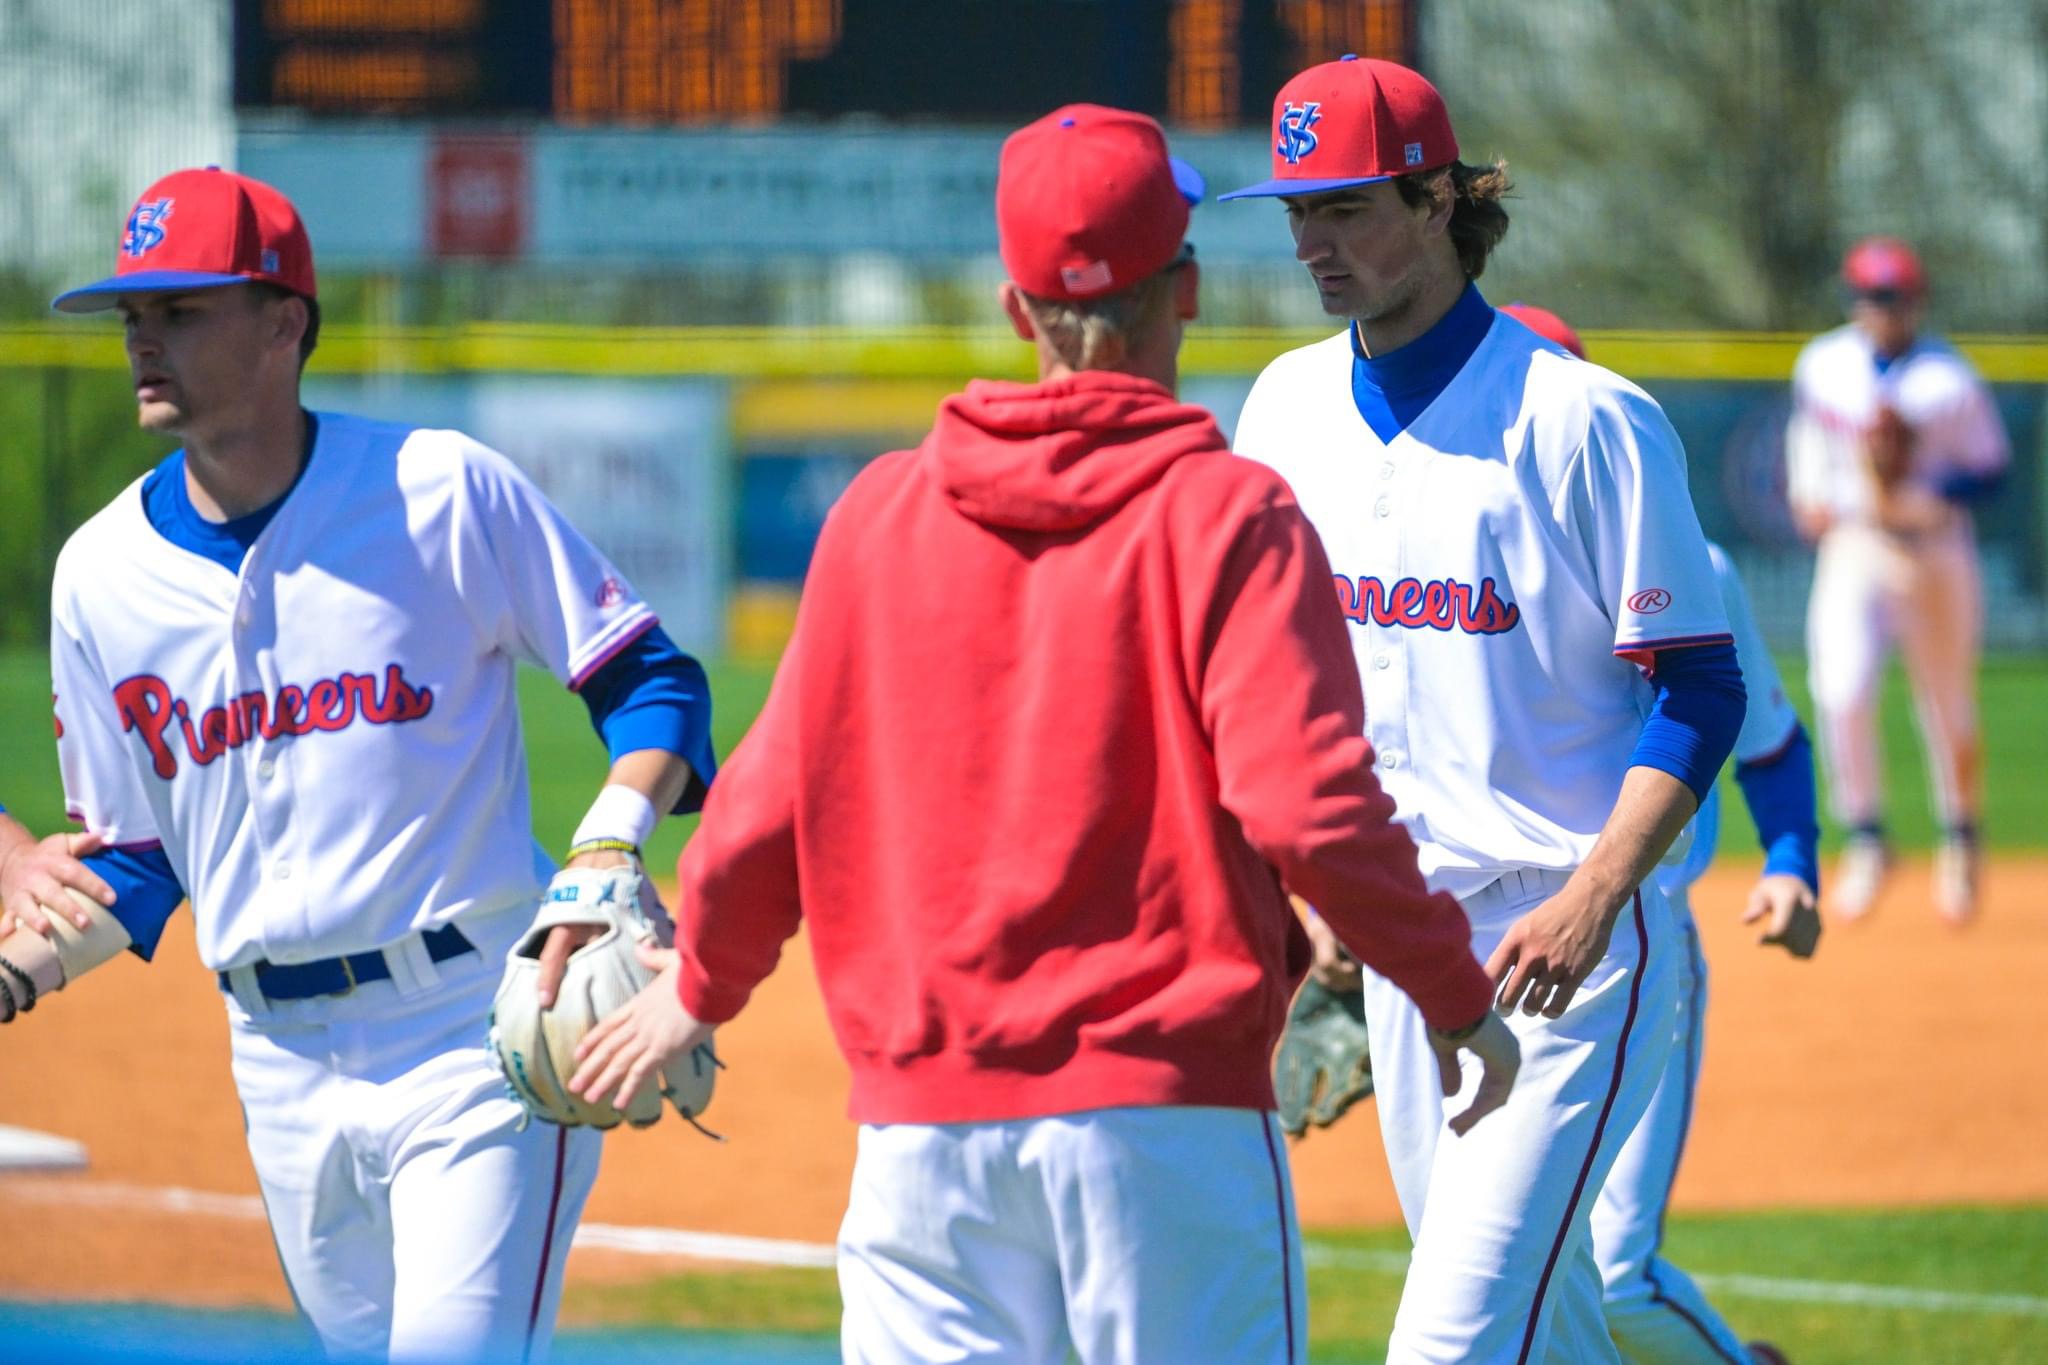 Vol State Splits First Conference Series with Motlow State